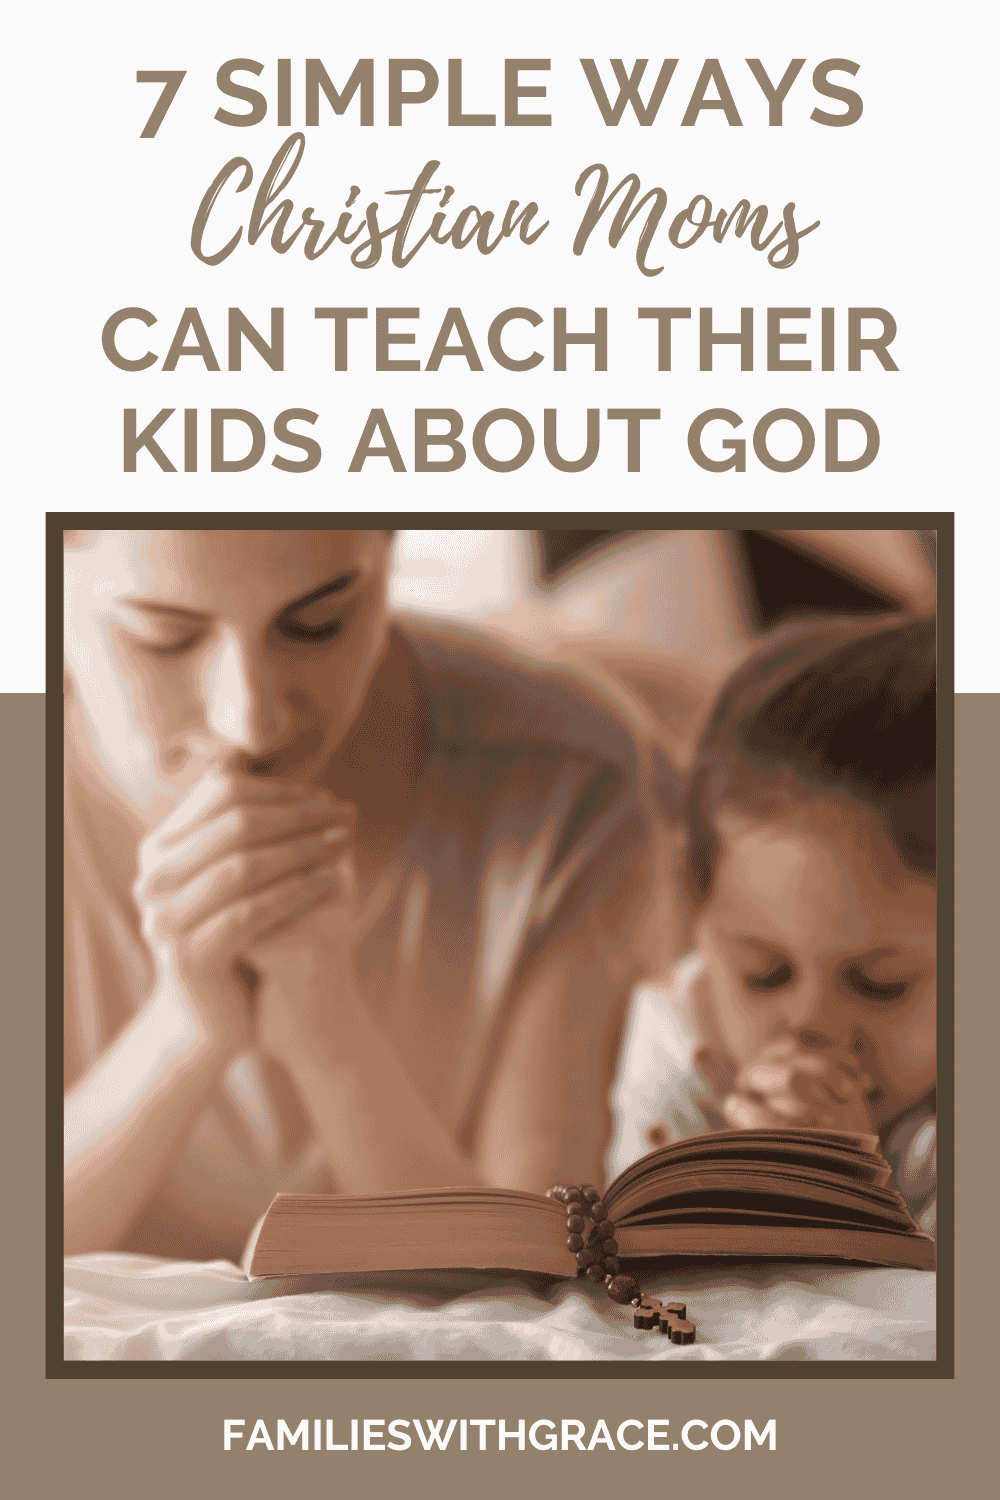 How Christian moms can teach their children about God